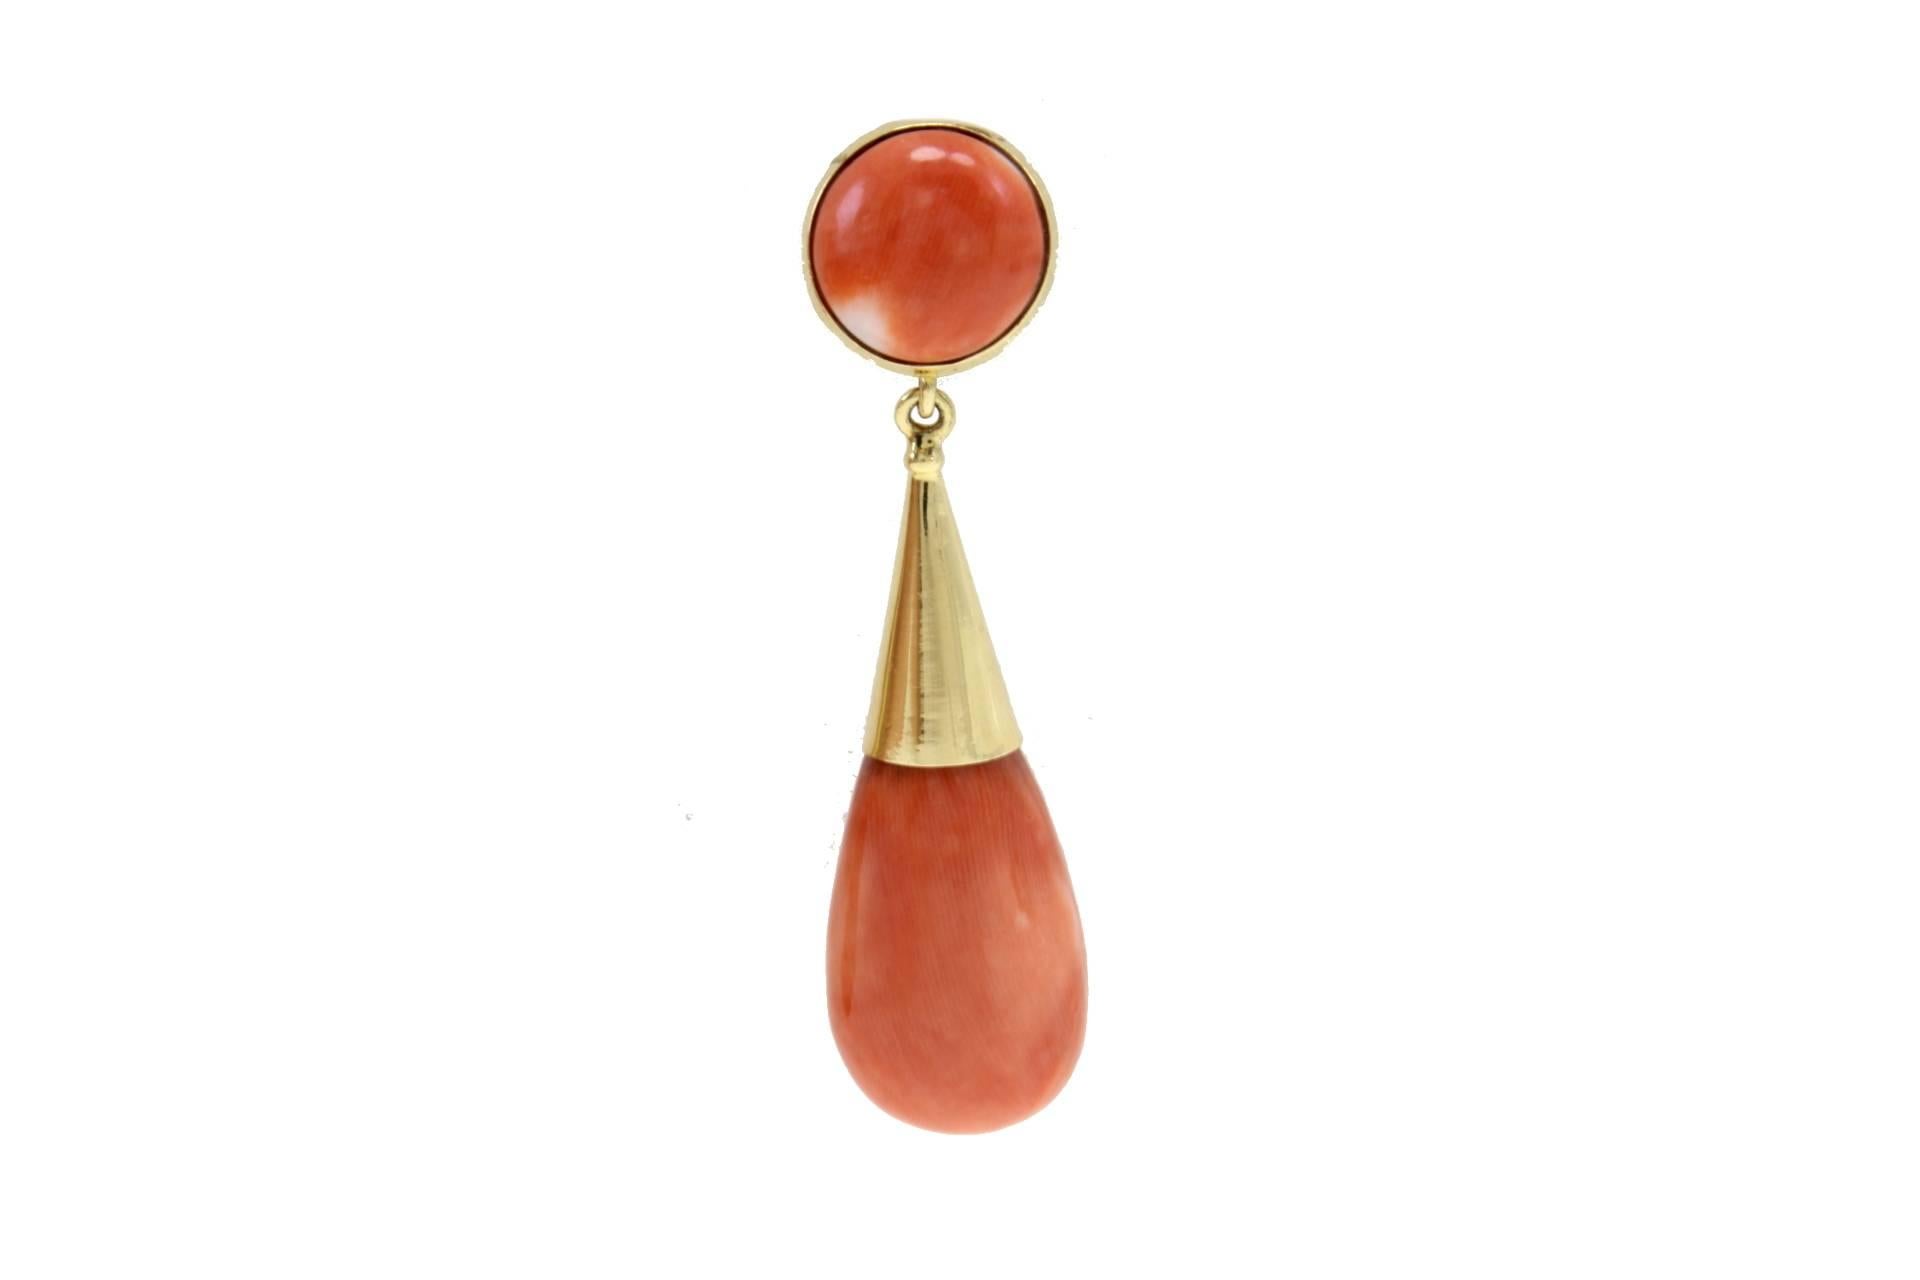 Elegant coral earrings in 18kt yellow gold.
coral 17.0gr
tot weight 23.8gr 
r.f.  huao

For any enquires, please contact the seller through the message center.